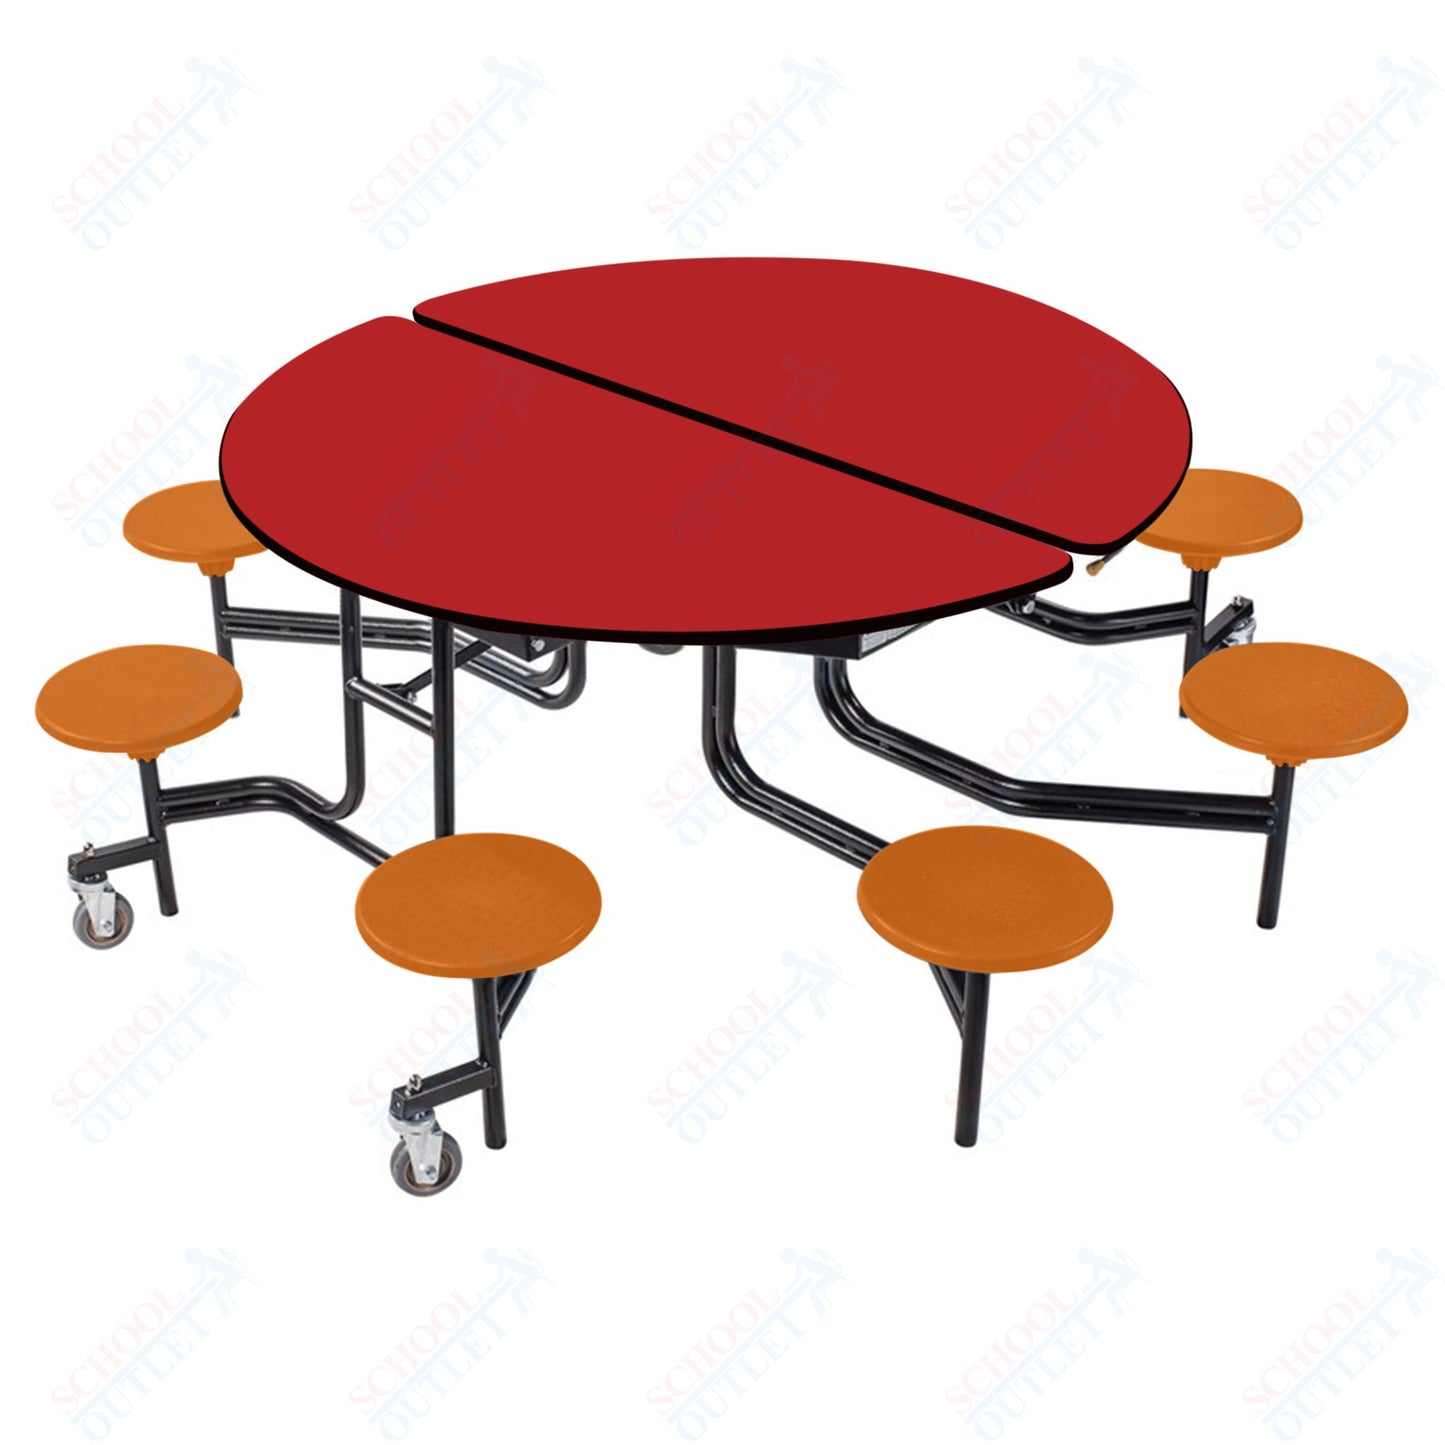 NPS 60" Round Mobile Cafeteria Table - 8 Stools - MDF Core - Protected Edge - Black Powdercoated Frame